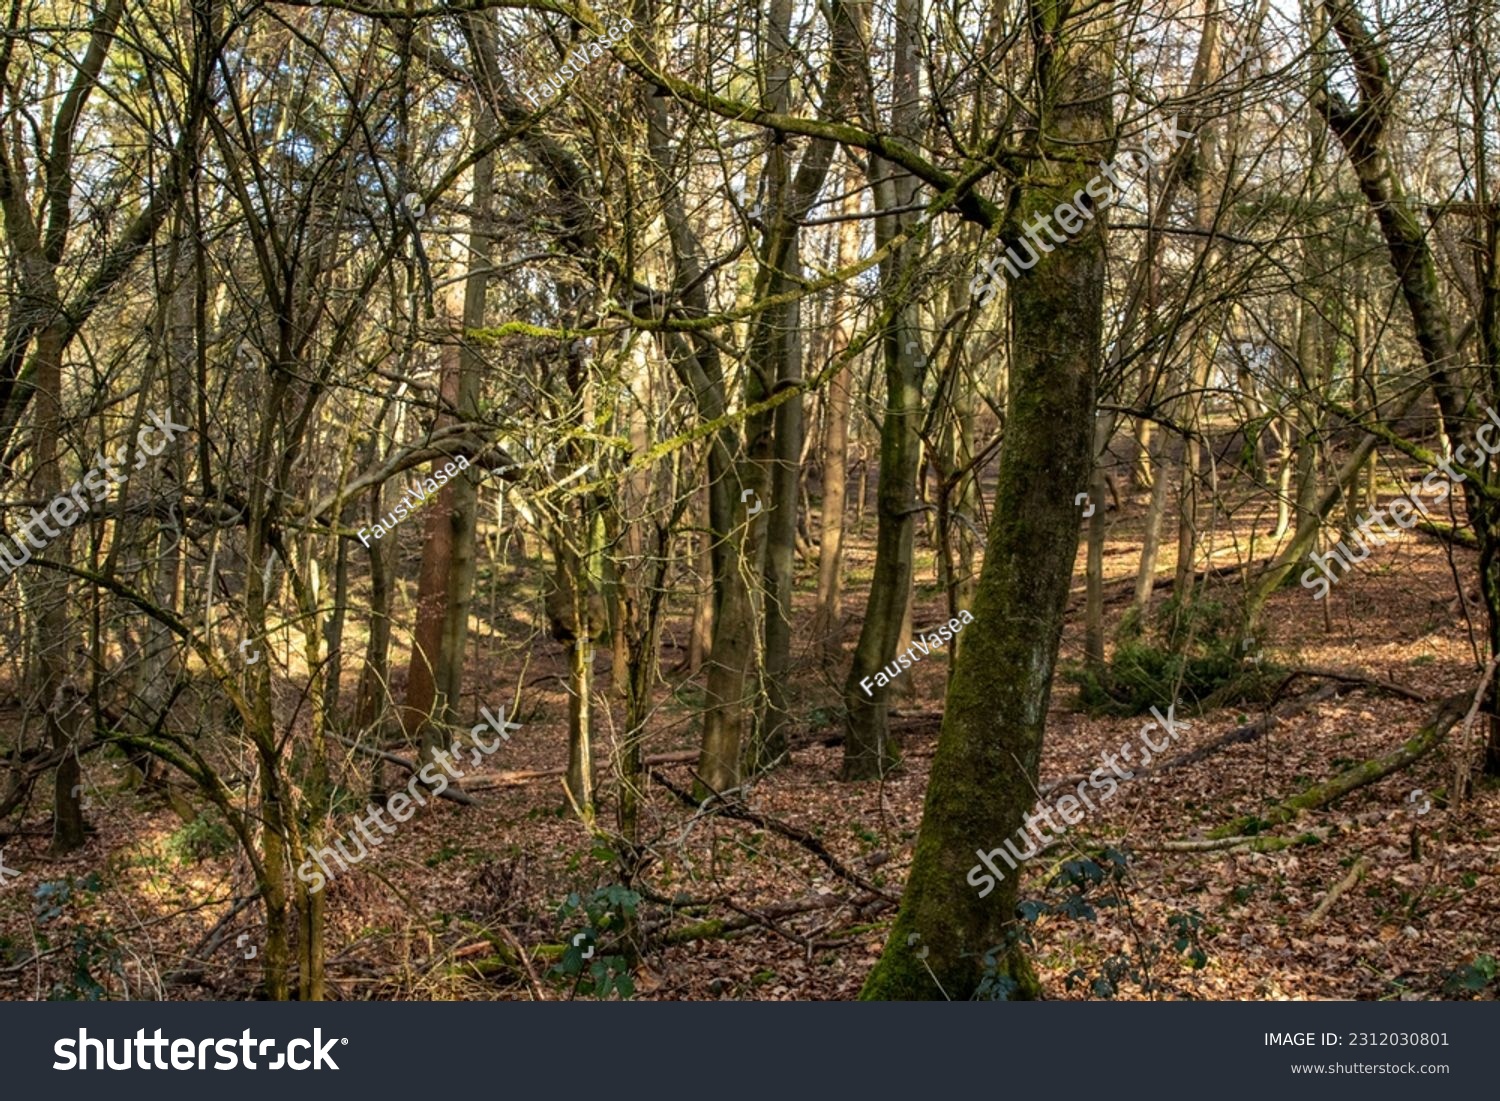 Epic photo of the forest in England  #2312030801